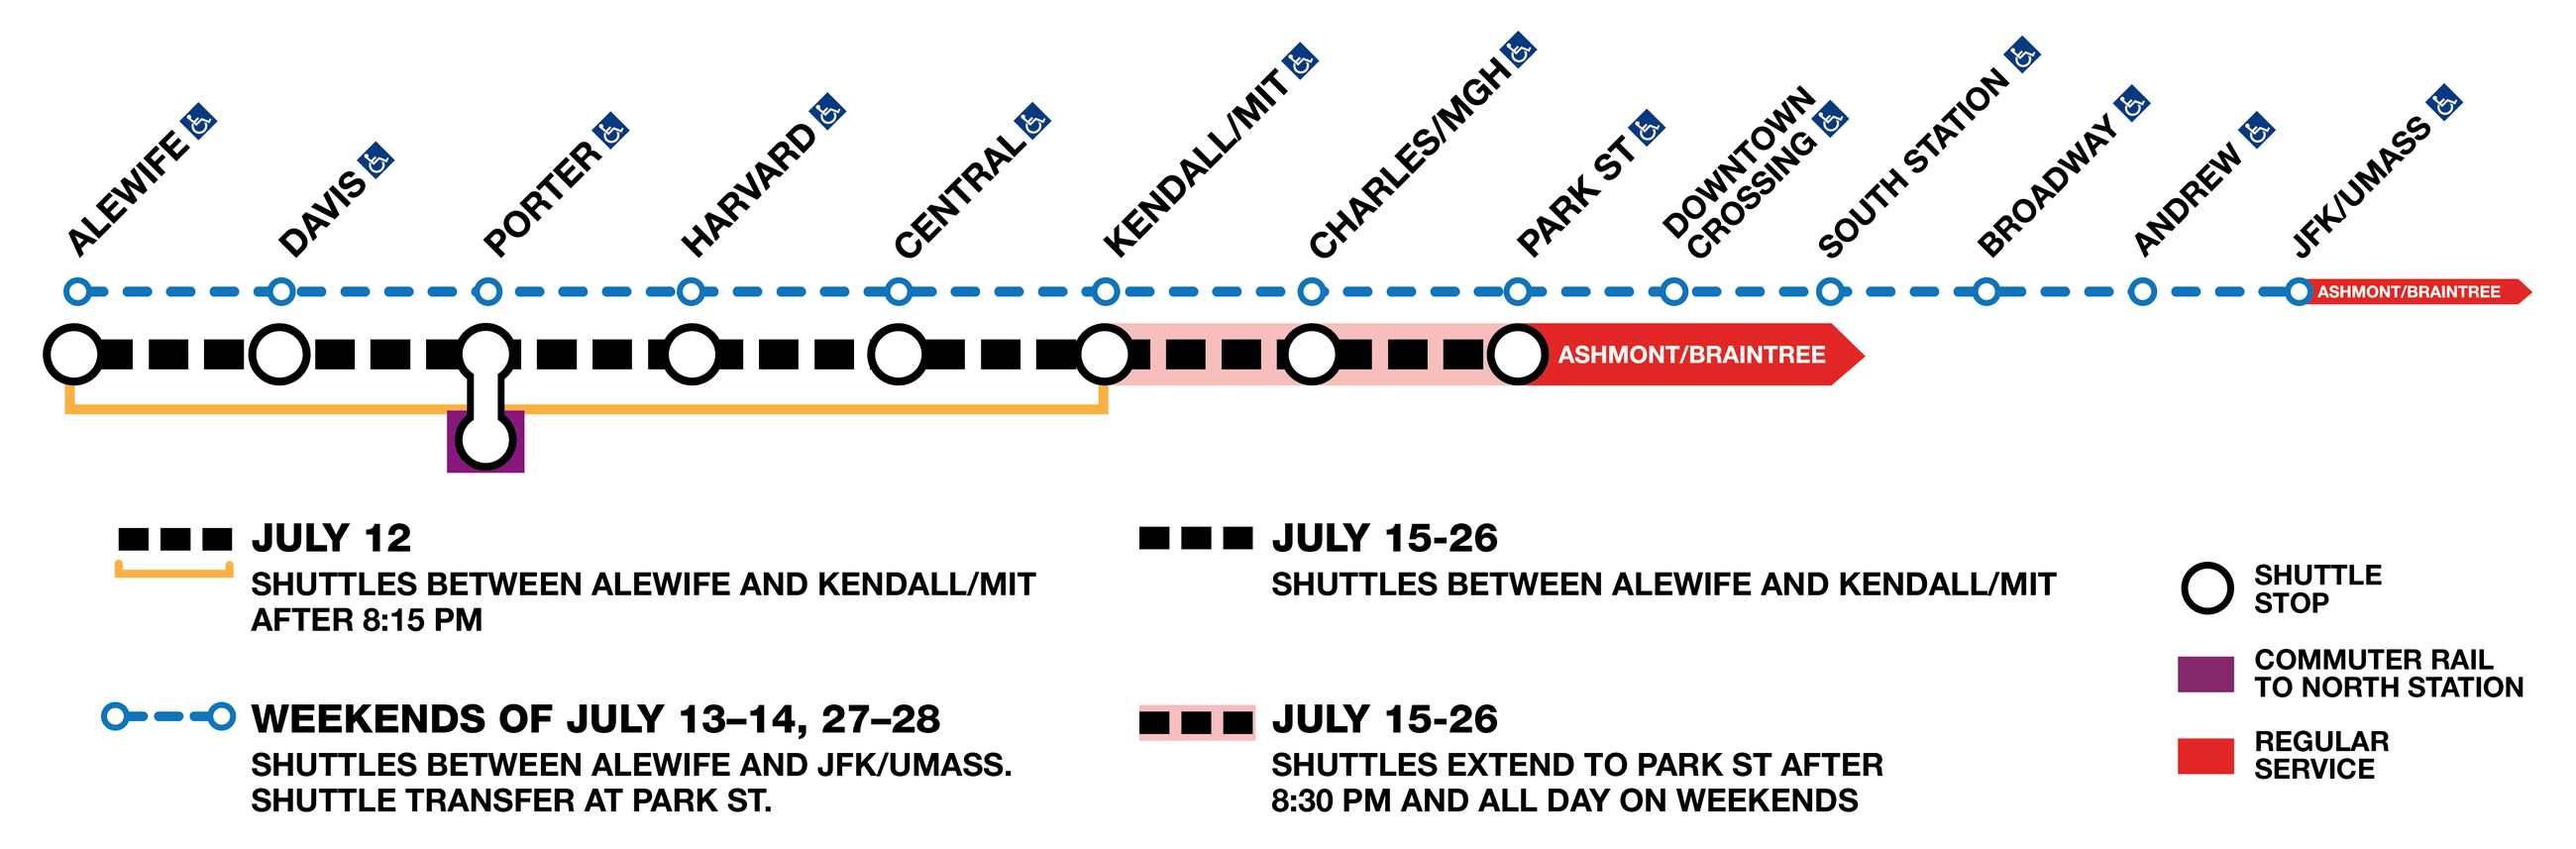 Diagram of Red Line closure showing only shuttle service 